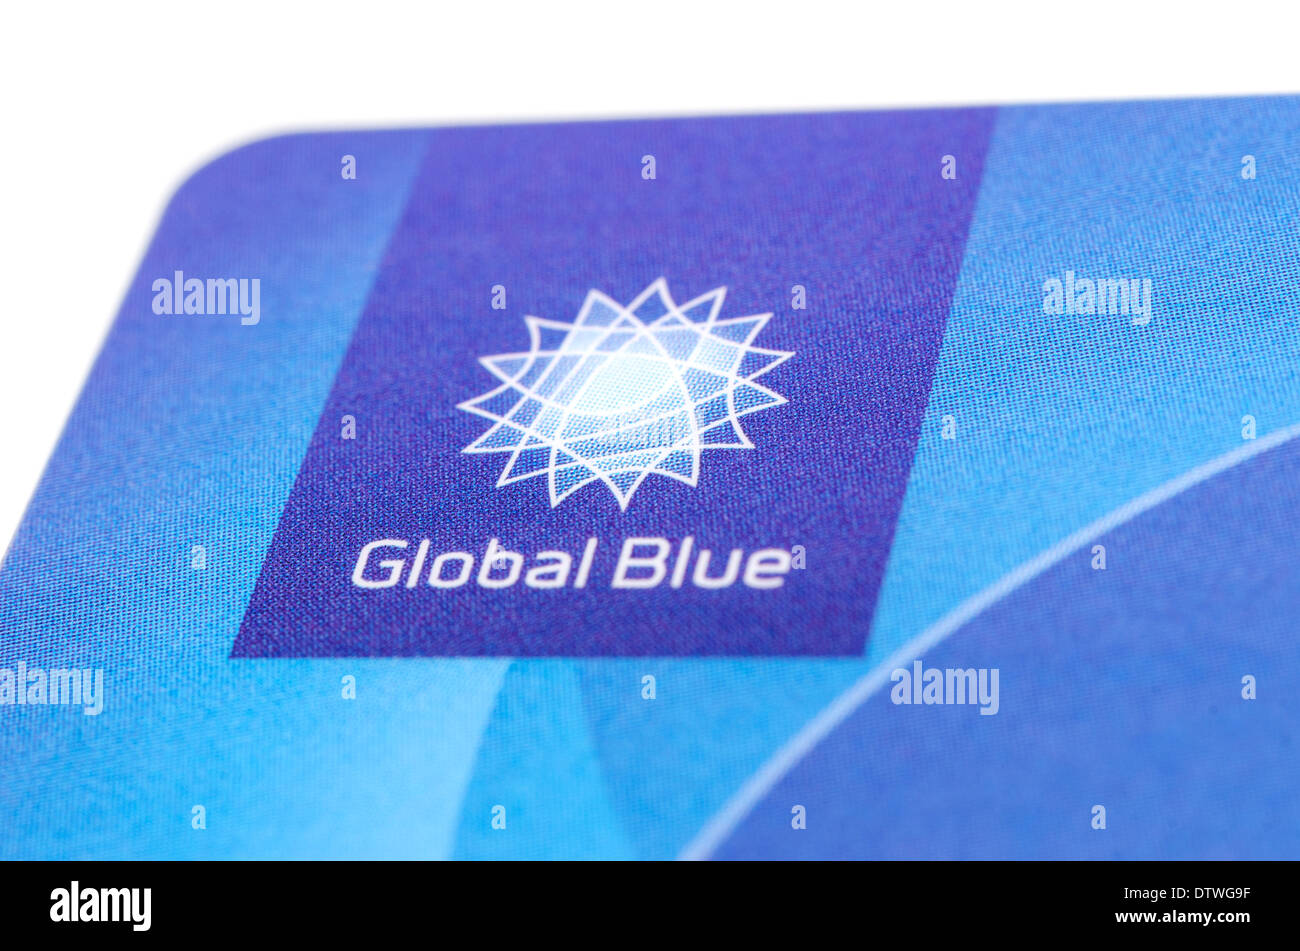 MUNICH, GERMANY - FEBRUAR 20, 2014: Close up corner of plastic card 'Global Blue' with logo this tax free company. Isolated Stock Photo